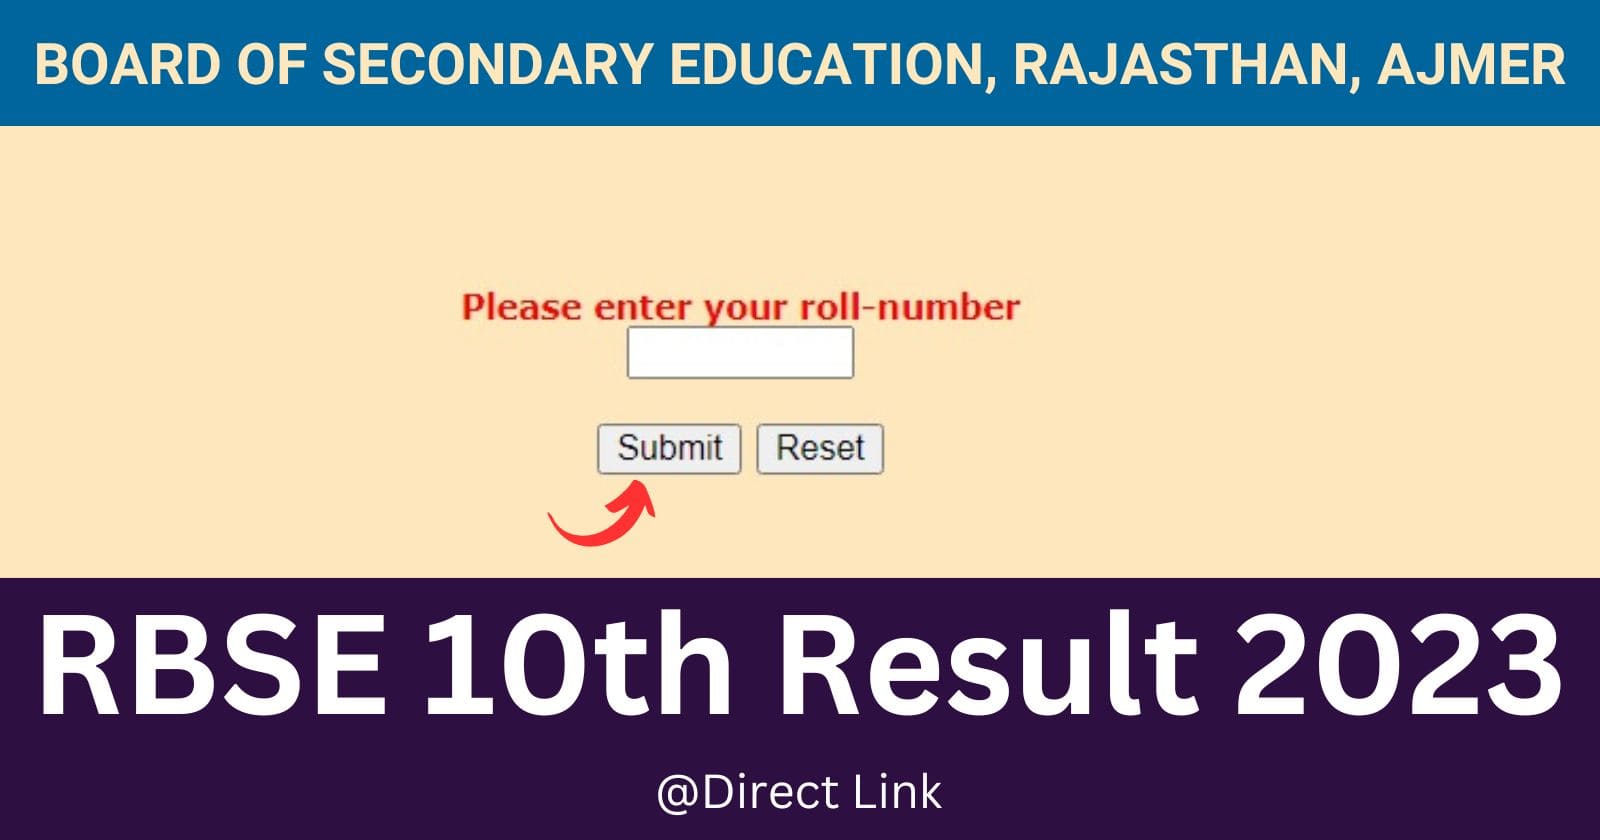 RBSE 10th Result 2023 OUT Rajasthan Class 10th Result Kab Aayega